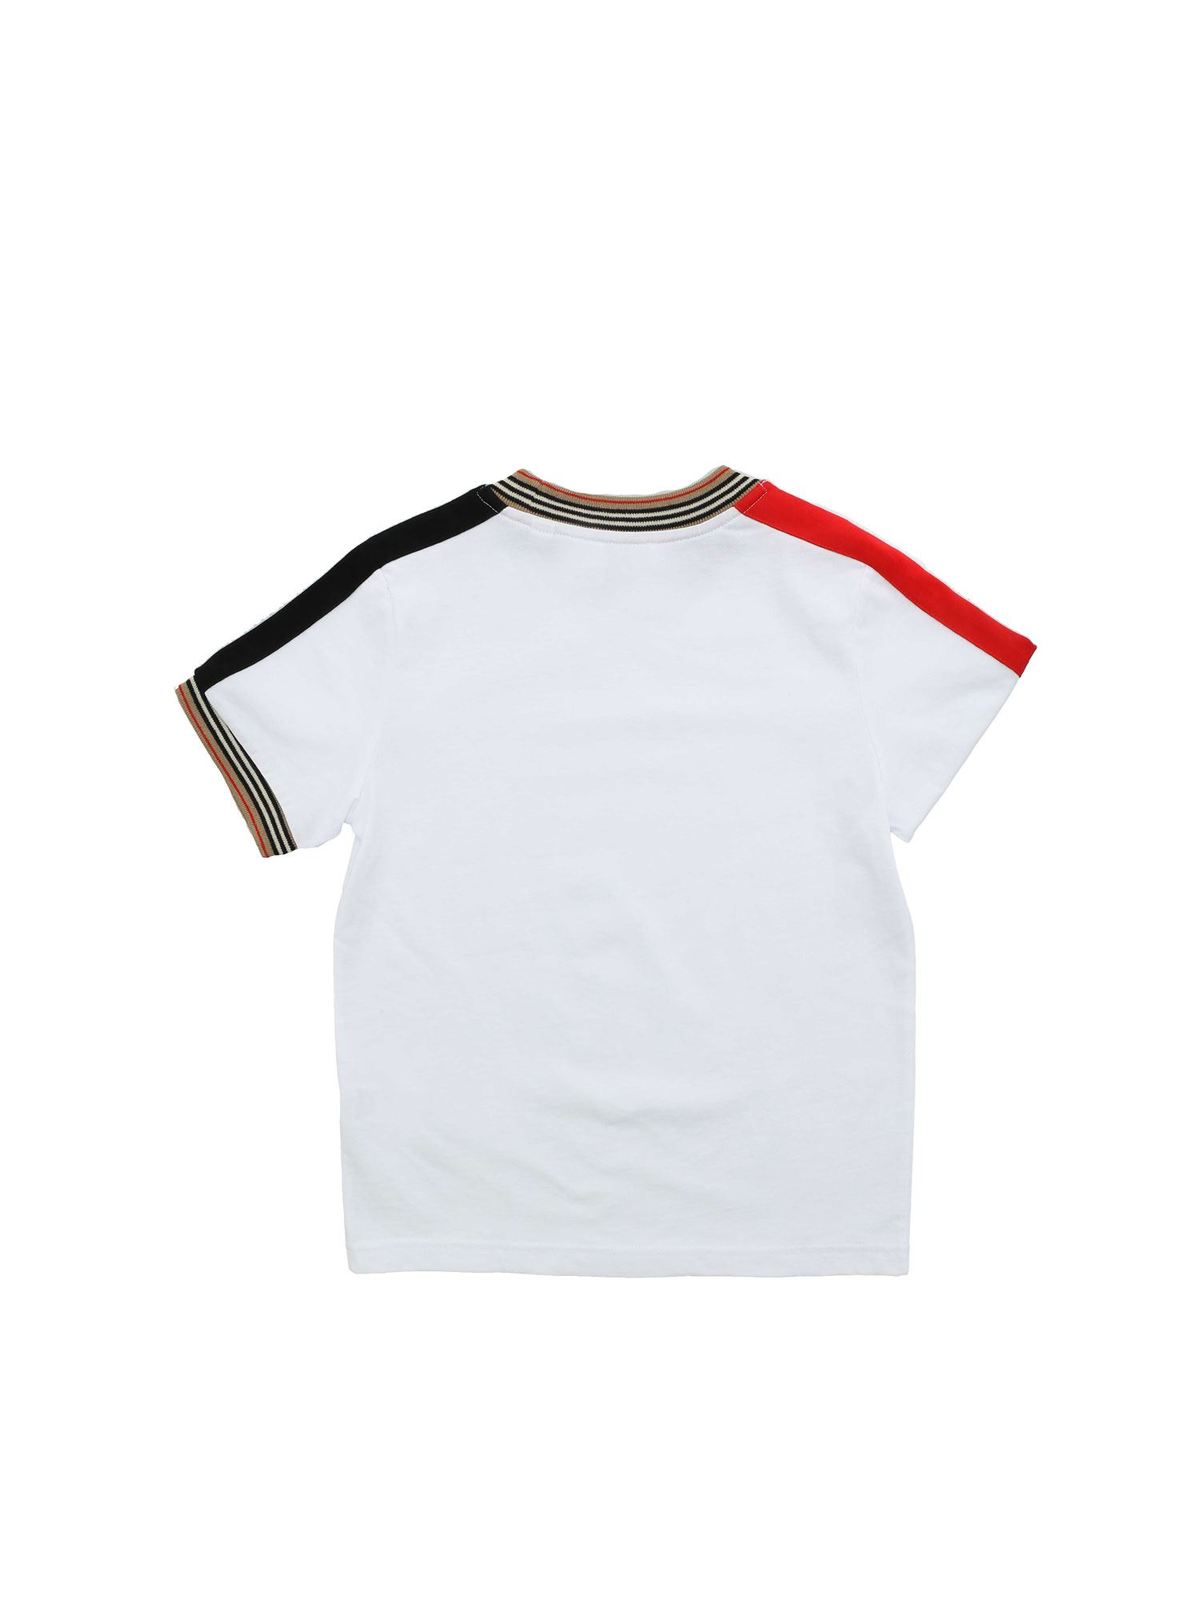 T-shirts Burberry T-shirt in white striped pattern - 8022251